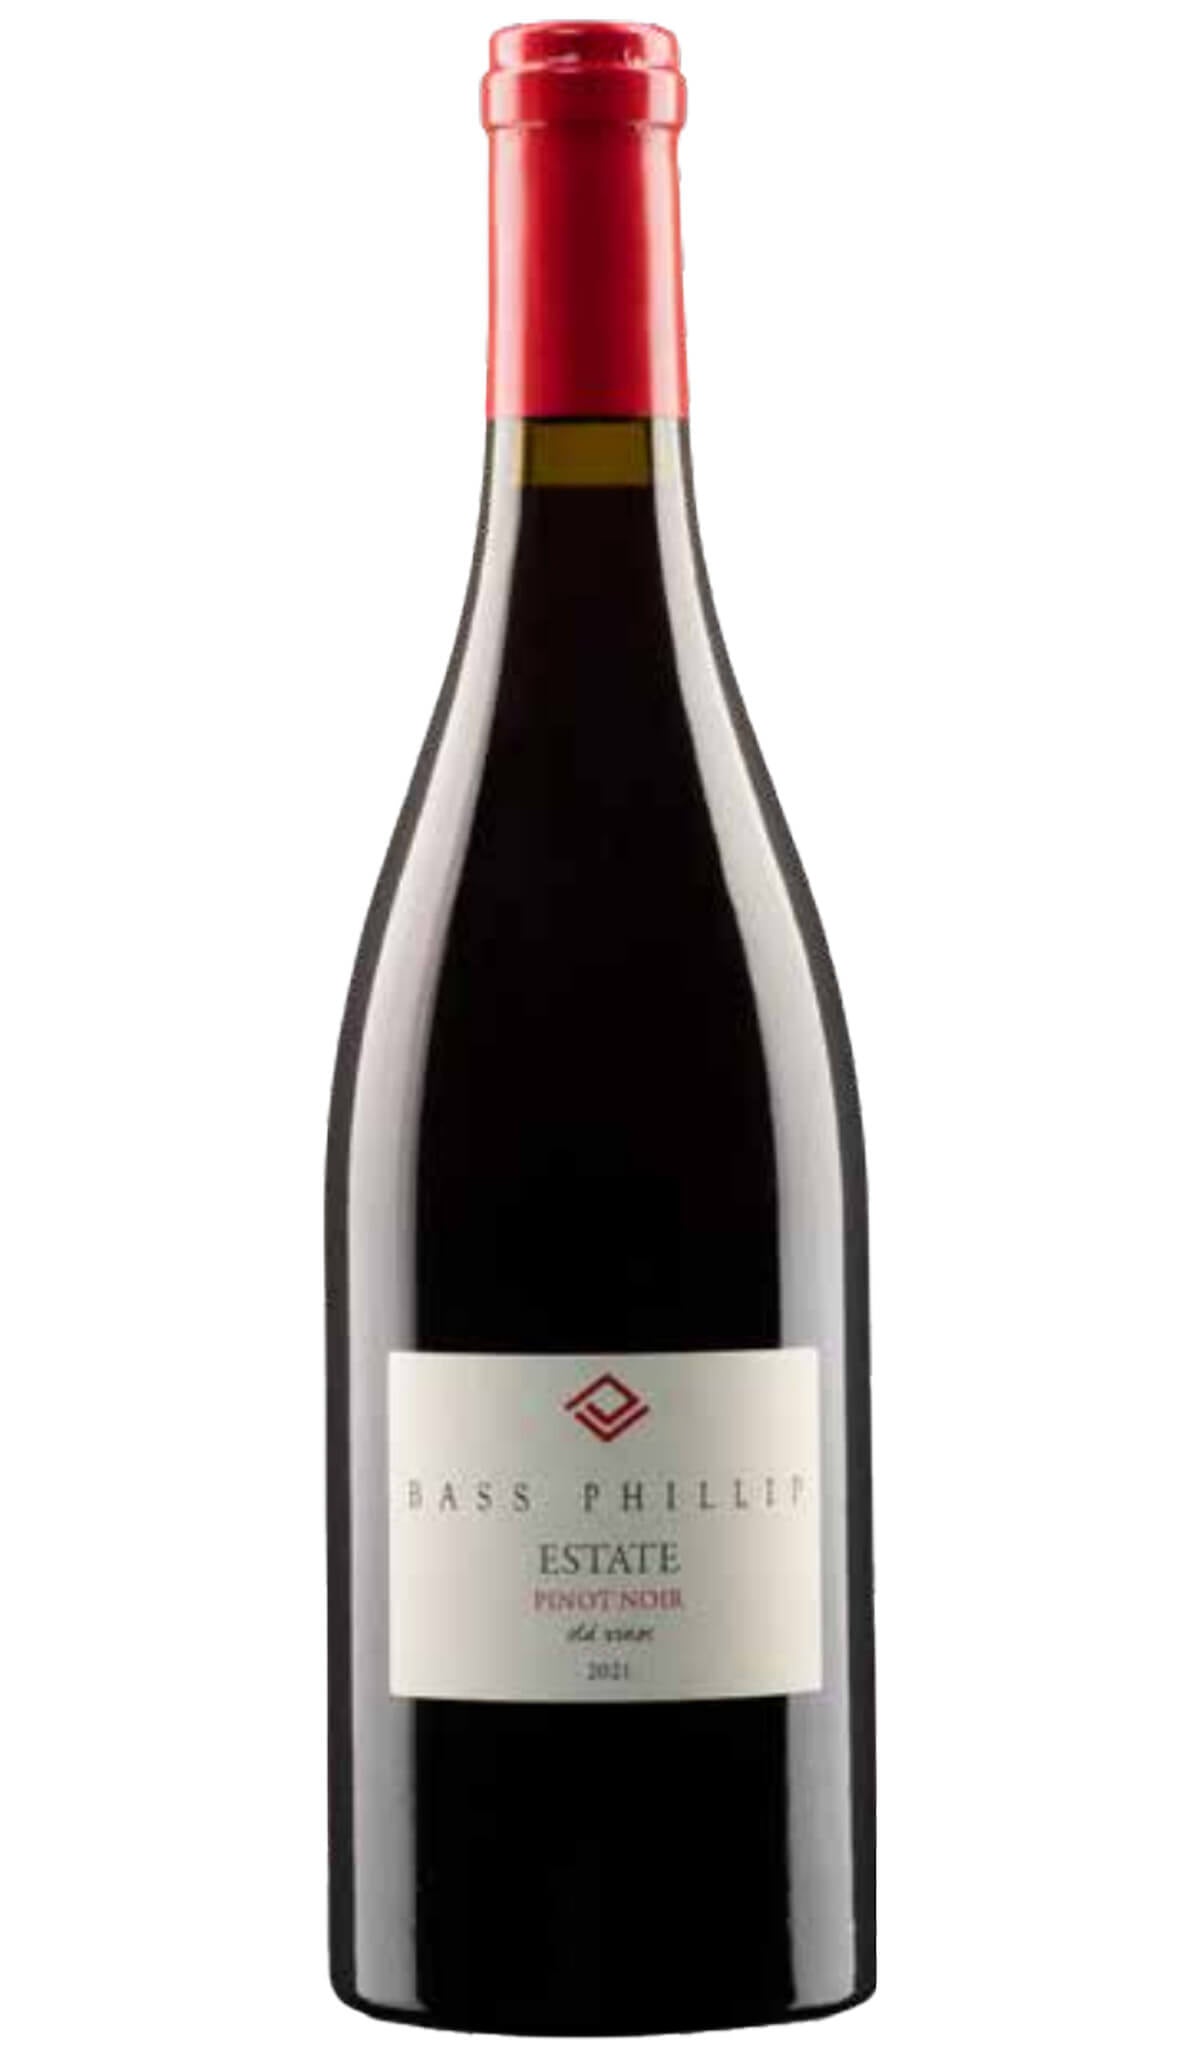 Find out more or buy Bass Phillip Estate Pinot Noir 2021 online at Wine Sellers Direct - Australia’s independent liquor specialists.